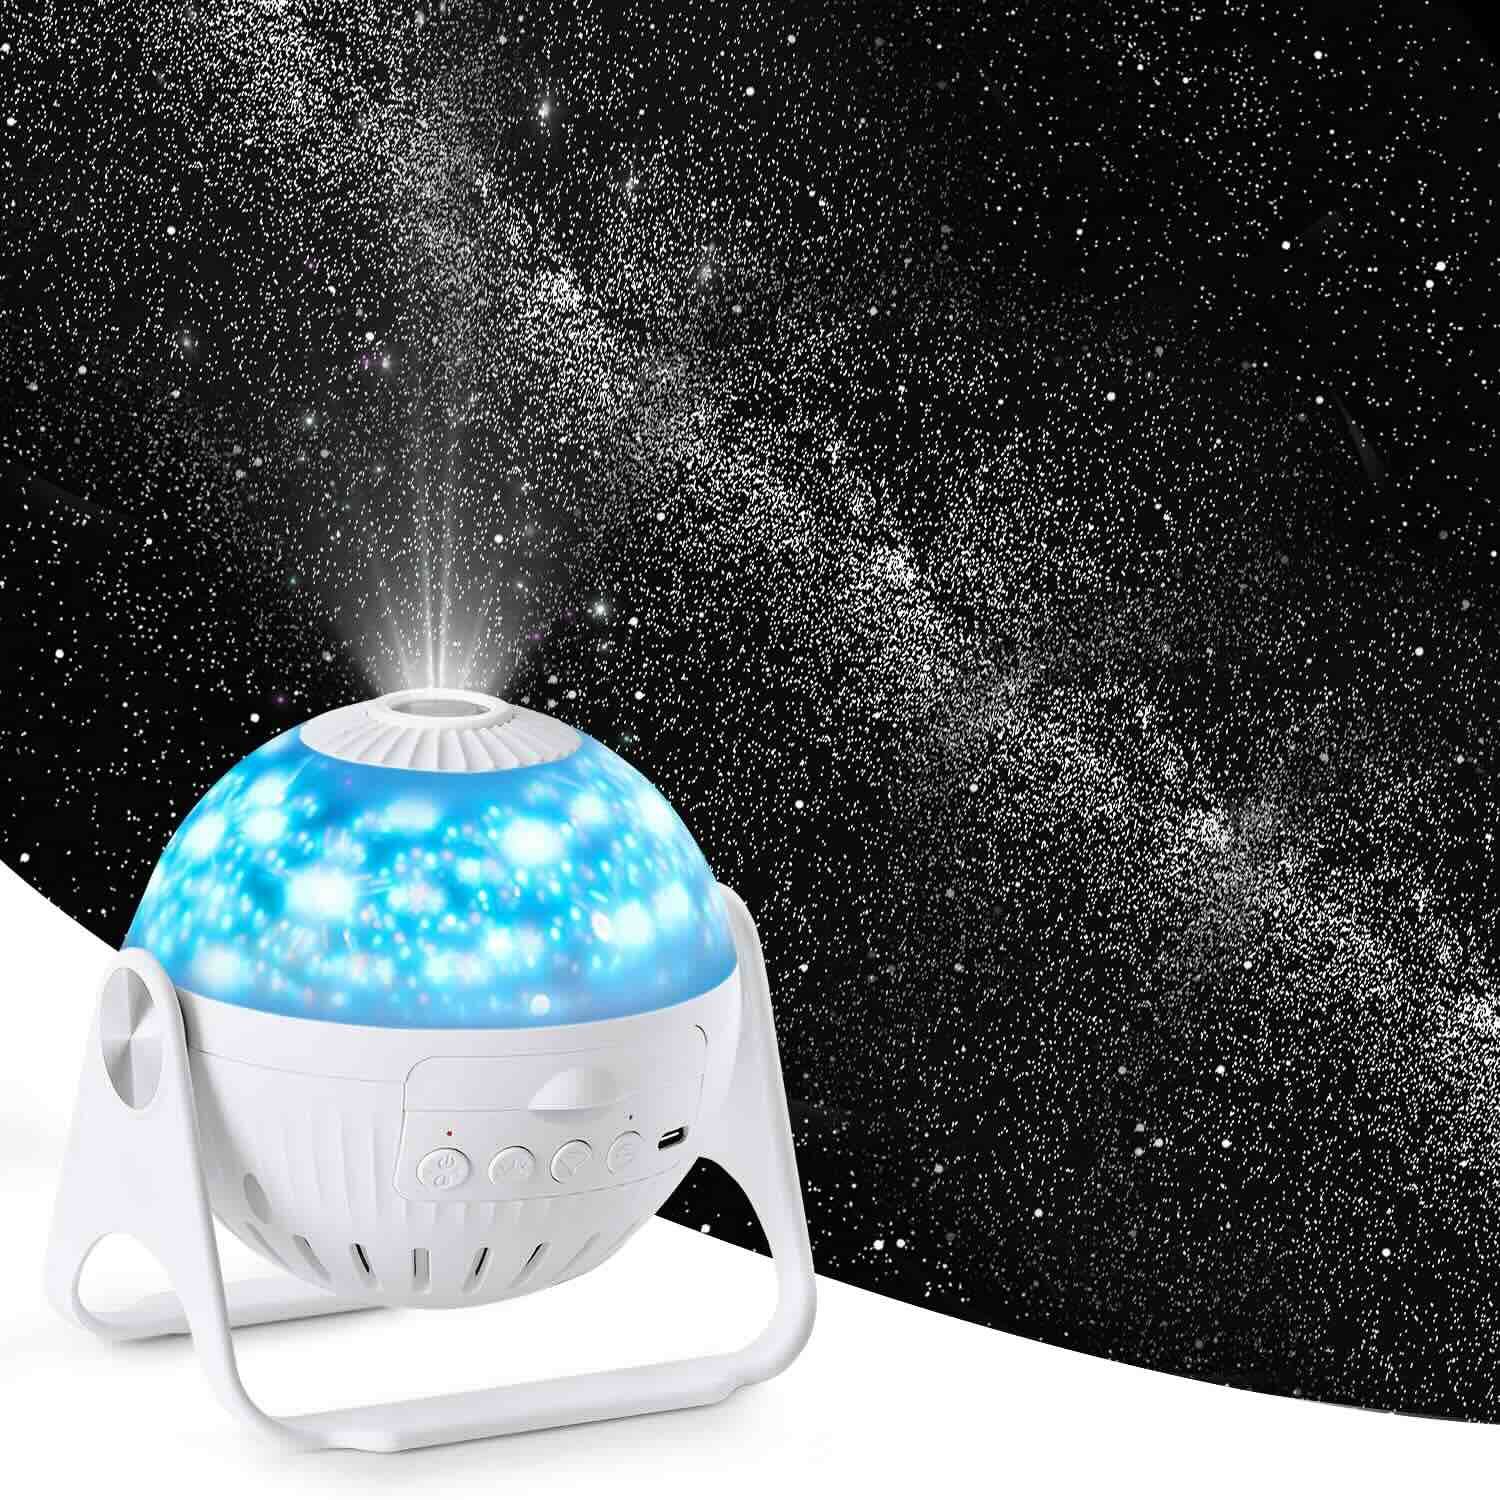 Galaxy, Star Projector for Night Sky, Planetarium Projector Light/Lamp for  Kids, Home, Bedroom(Orzorz)